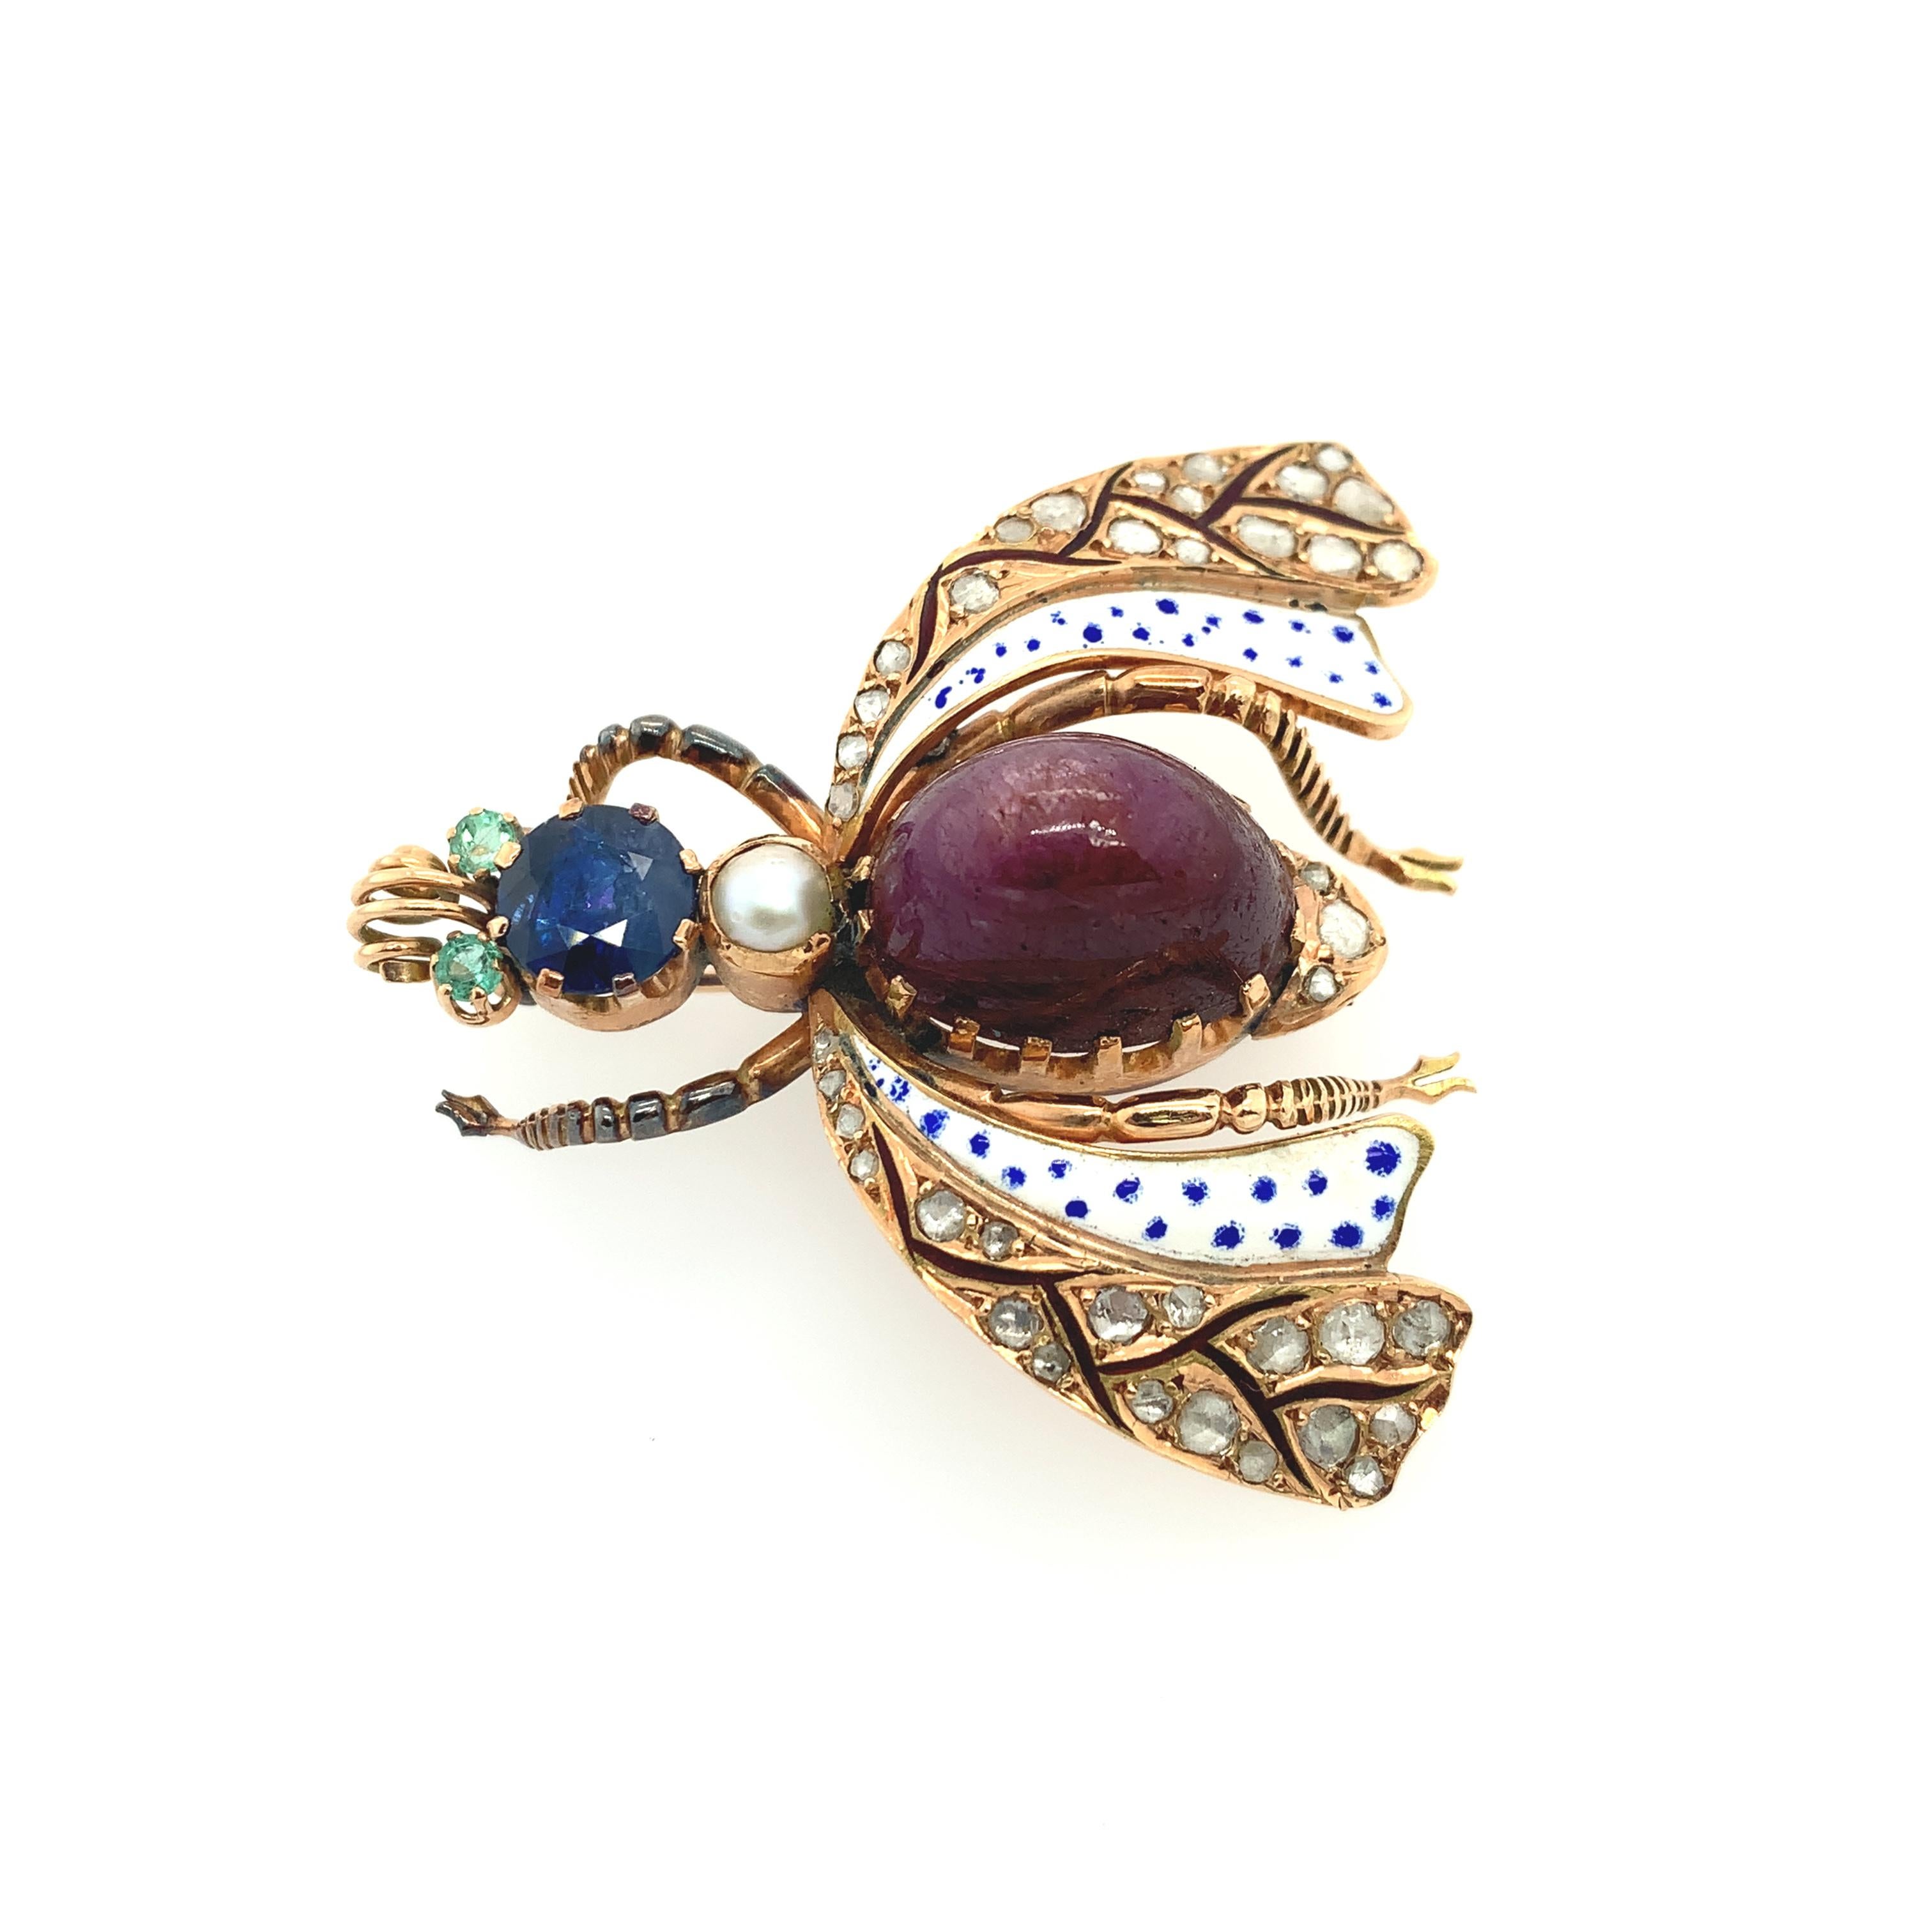 An impressive hand-made Victorian insect brooch in 14K rose gold, embellished with (39) thirty-nine old rose cut diamonds. At its center, the insect features bead set diamonds with emerald eyes, a sapphire head, and decorated with a pearl and star